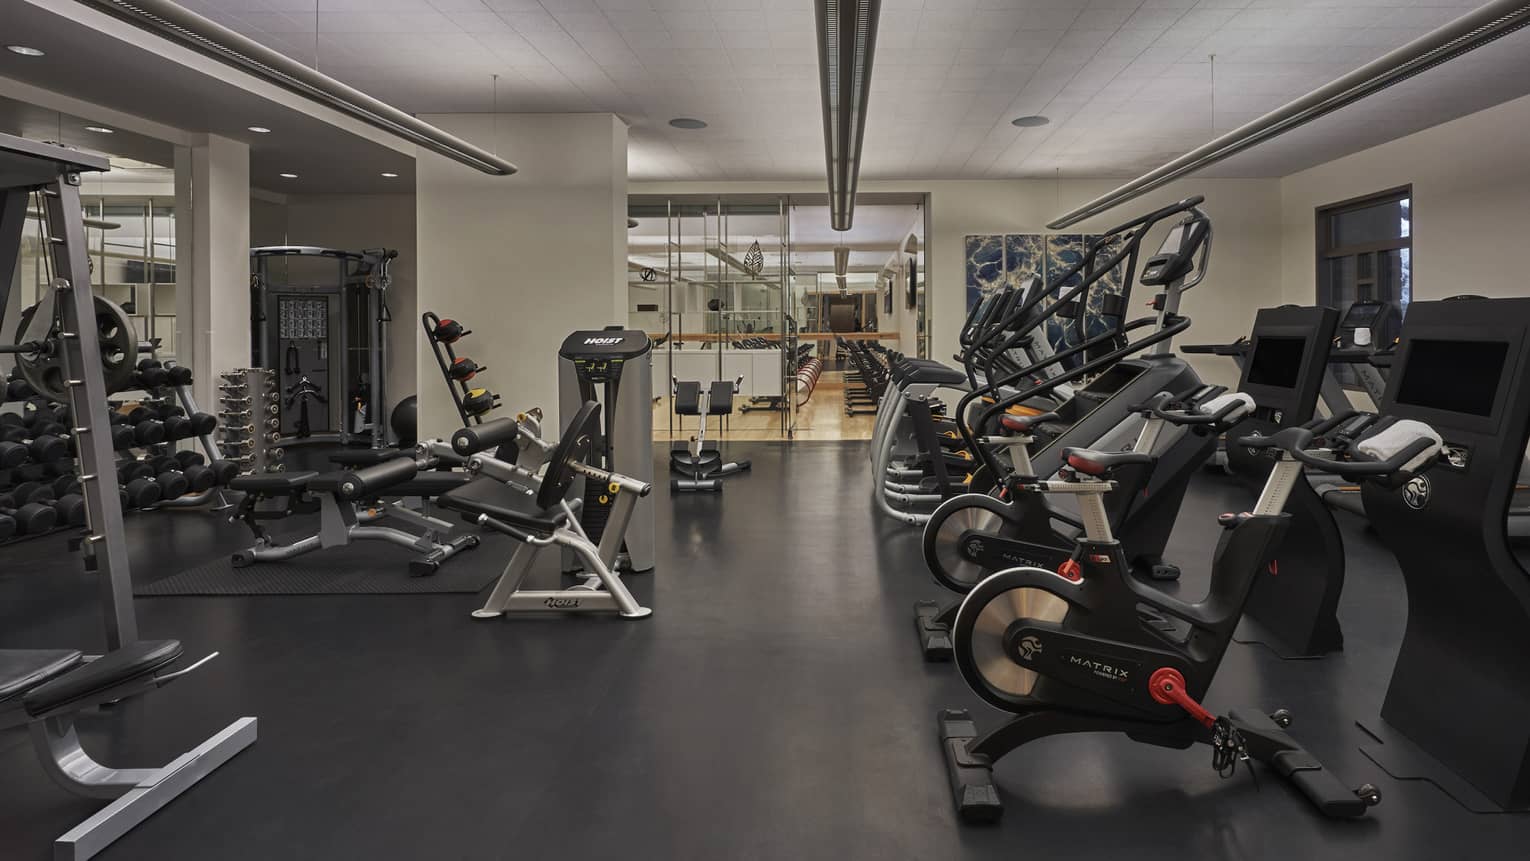 Indoor gym, white walls, black floors, various weight-training and cardio machines